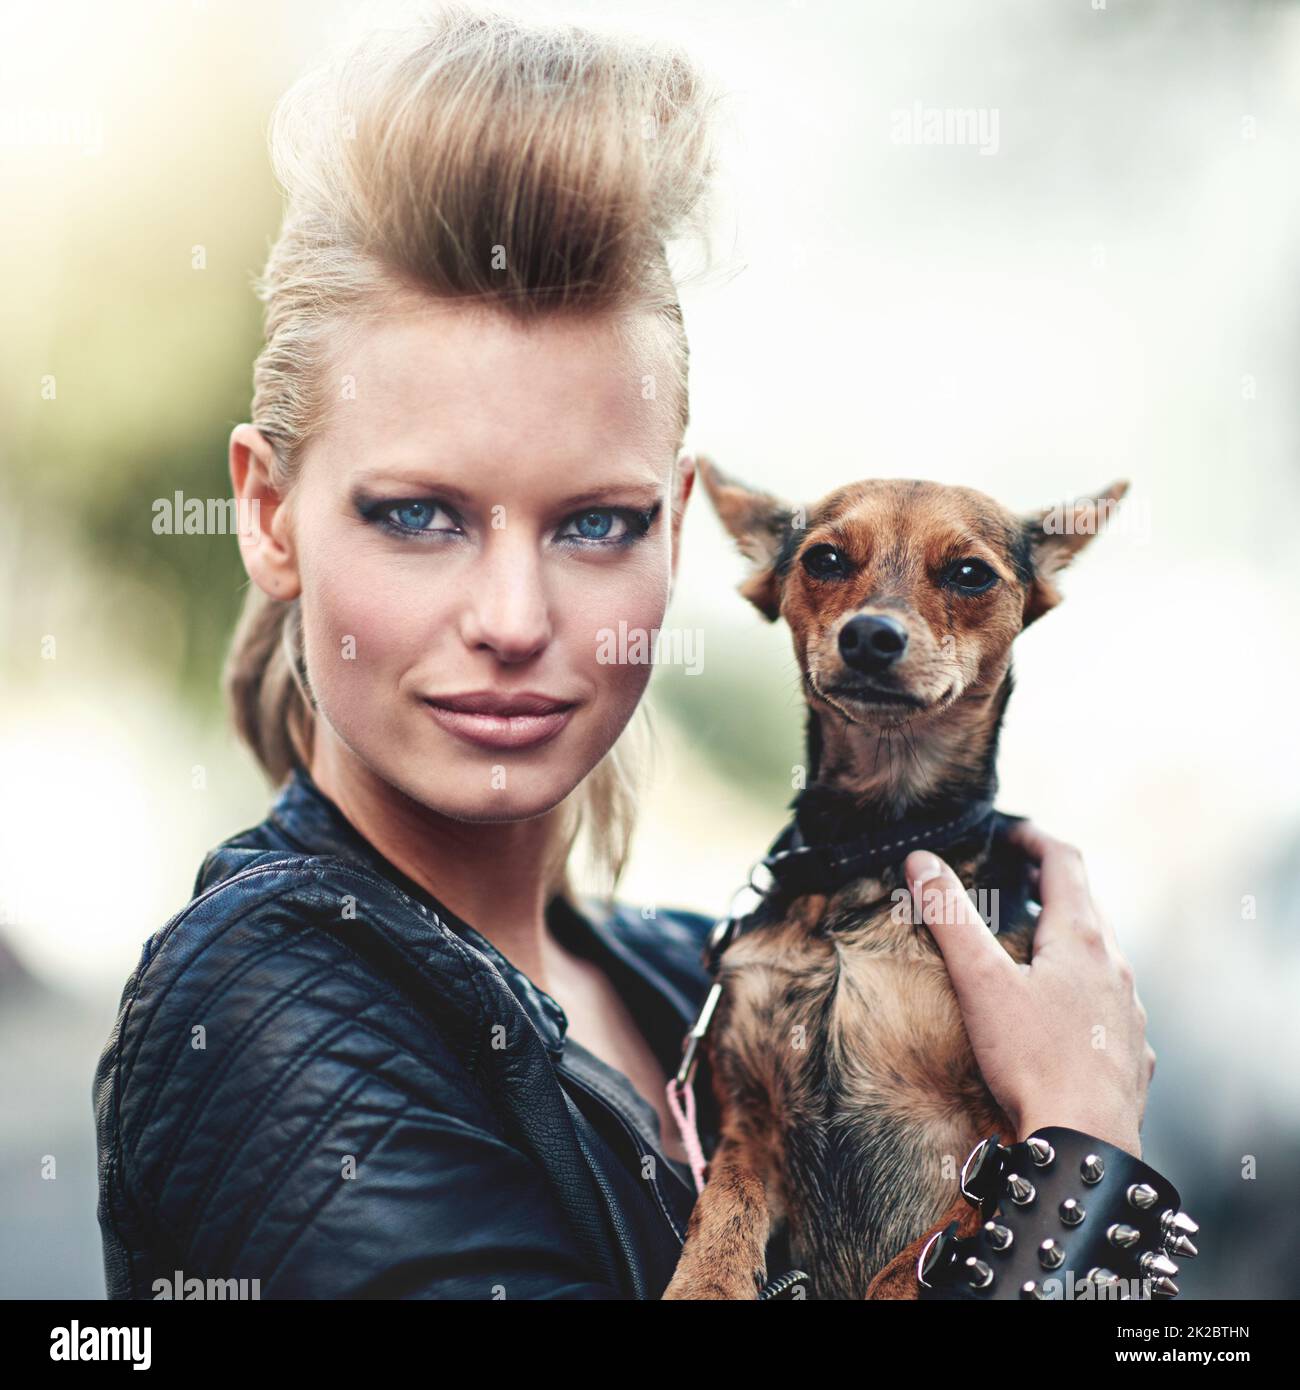 Hes a rockstar. Cropped portrait of an edgy young woman holding her small dog outdoors. Stock Photo